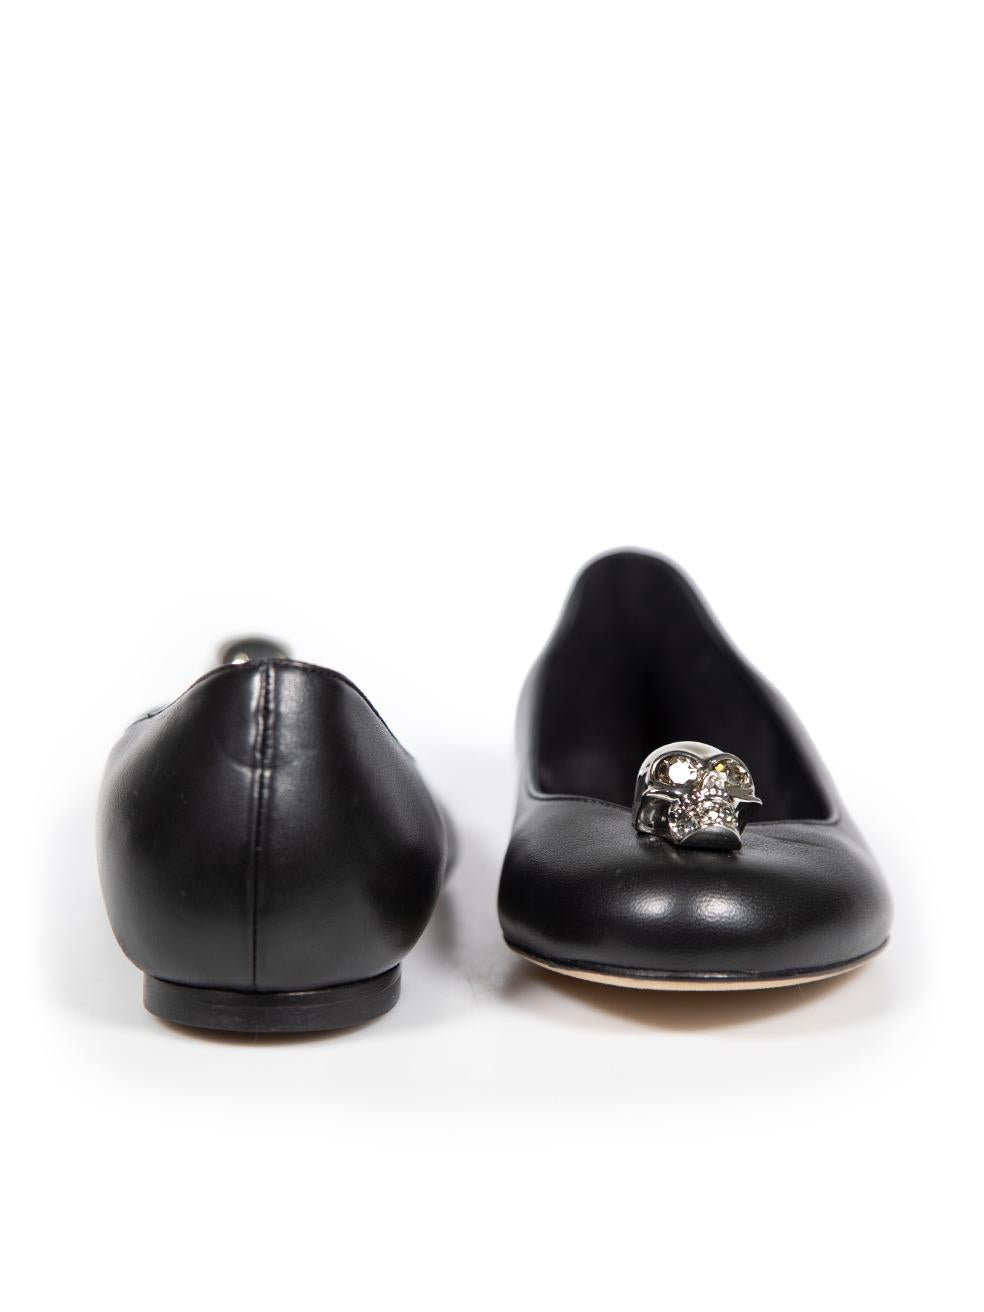 Alexander McQueen Black Leather Skull Flats Size IT 38 In Excellent Condition For Sale In London, GB